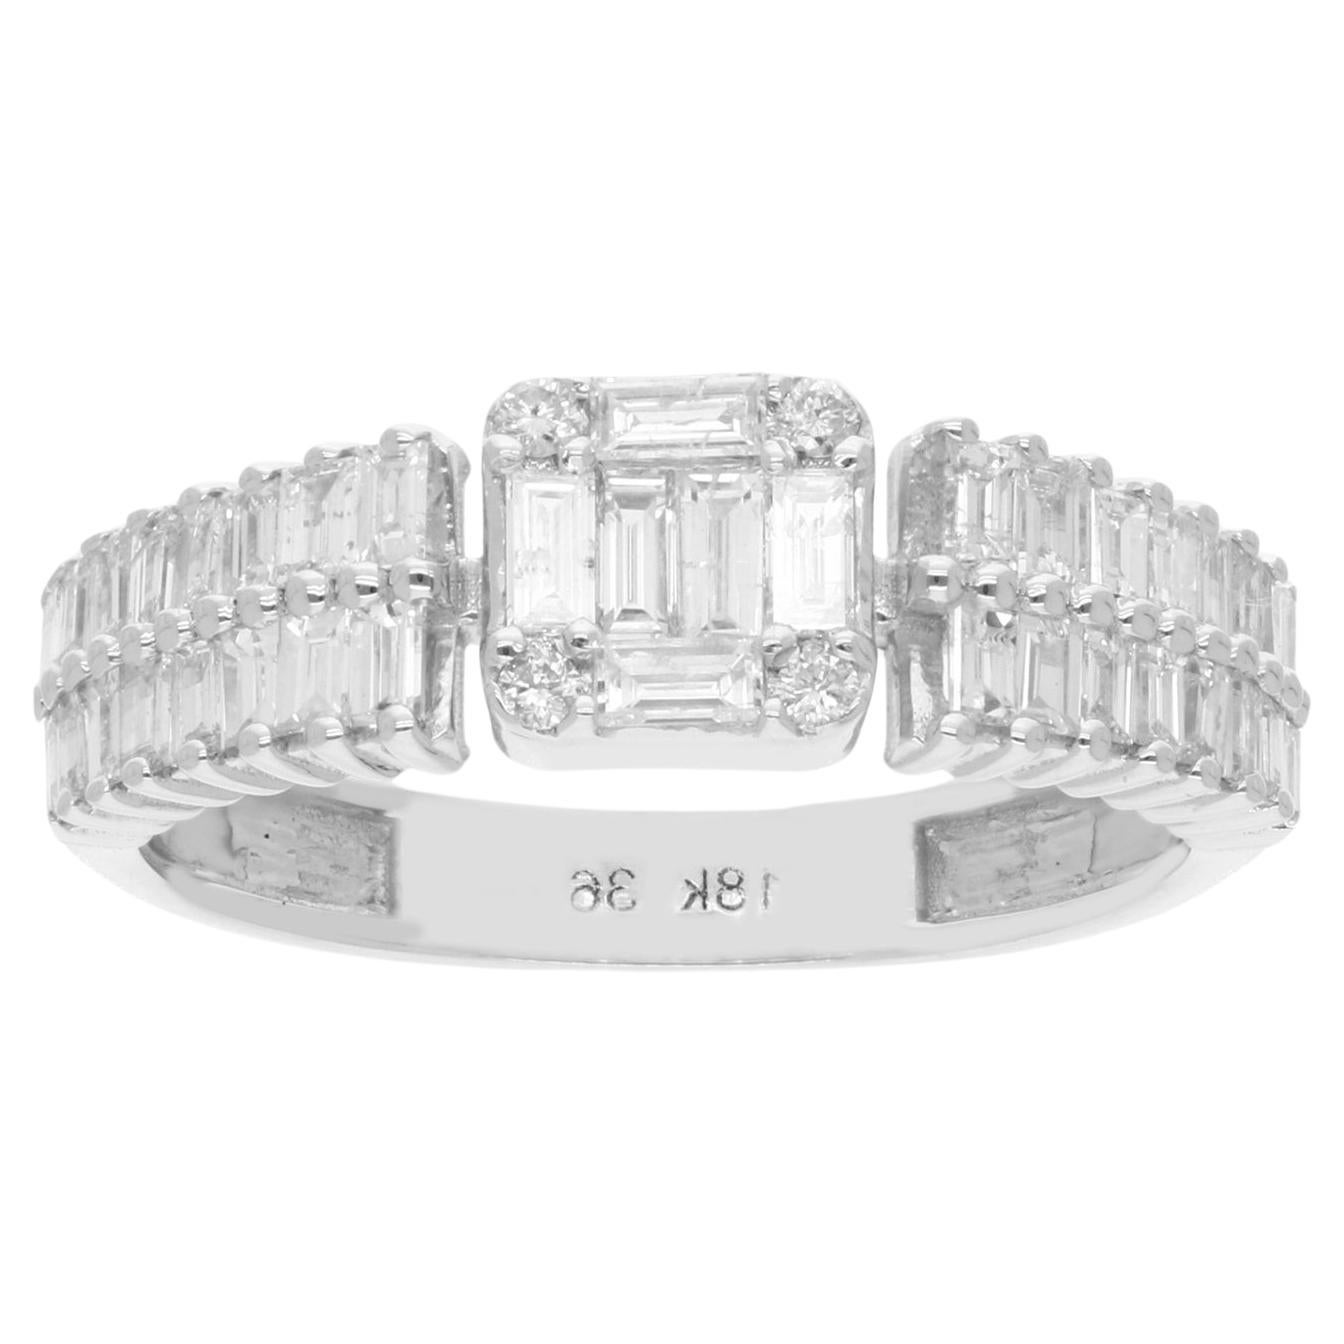 0.90 Carat Baguette Round Diamond Band Ring 18 Karat White Gold Fine Jewelry For Sale